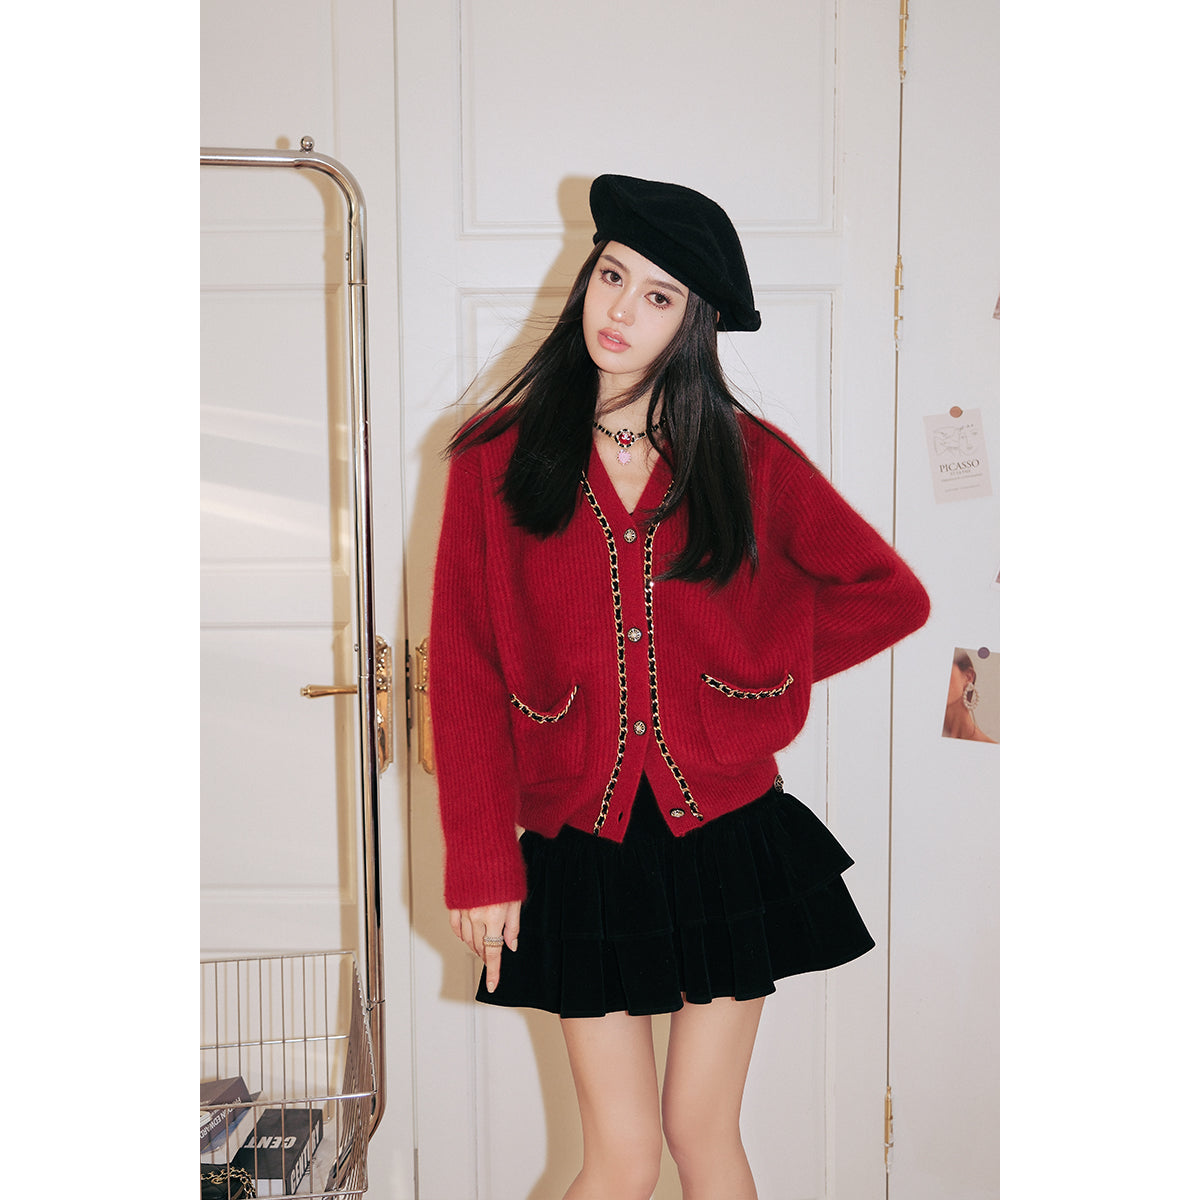 DIANA VEVINA Button Gold Chain Knit Cardigan Red